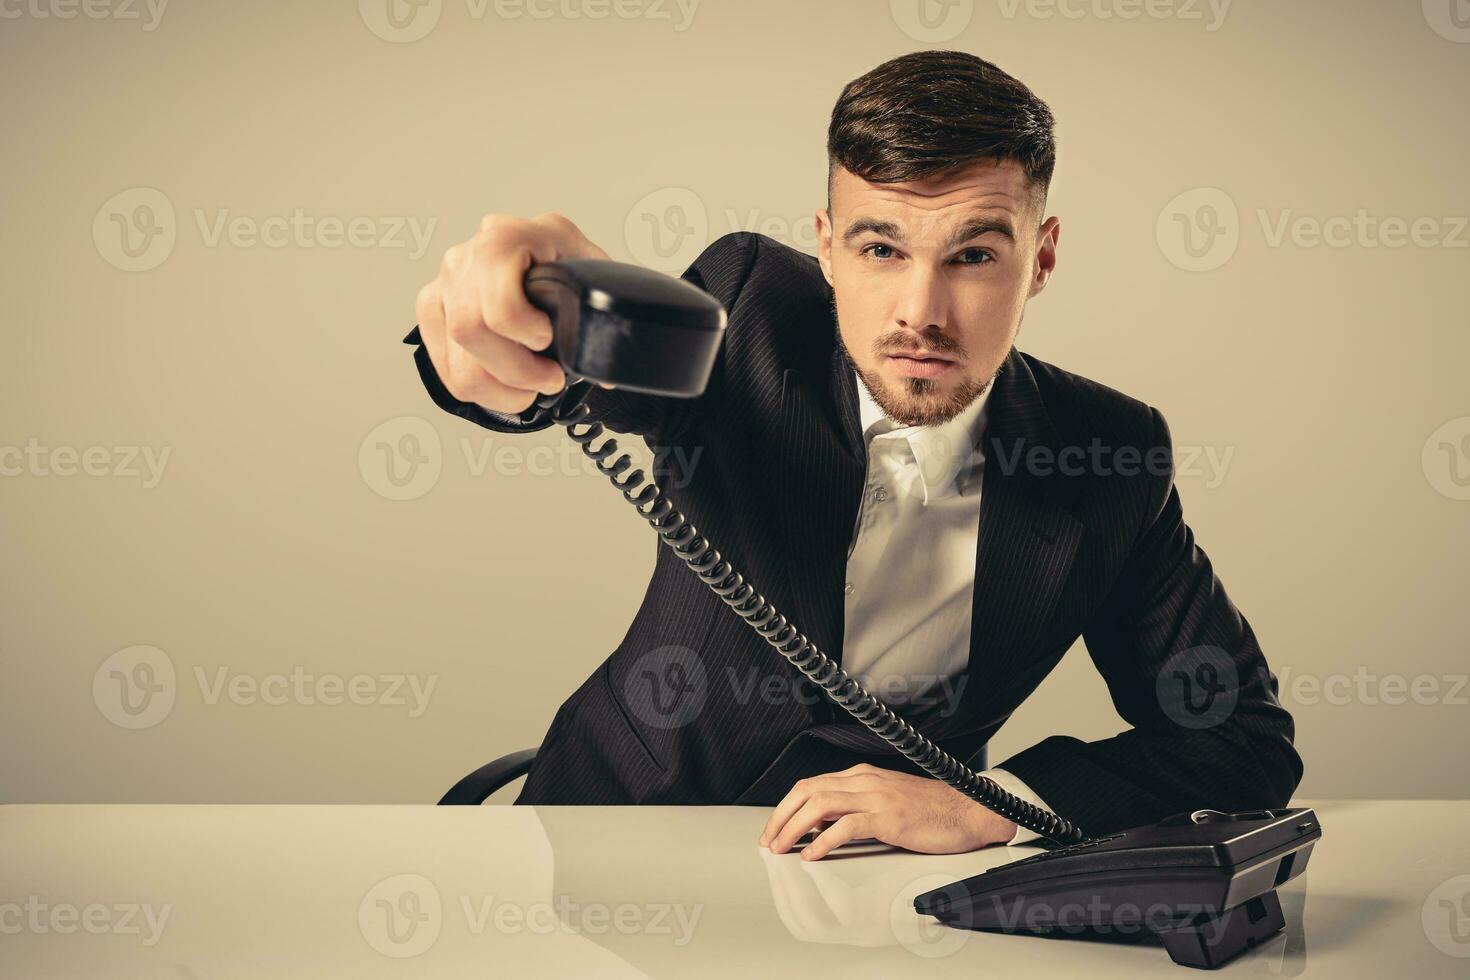 Portrait of attractive businessman holding telephone in his hand photo